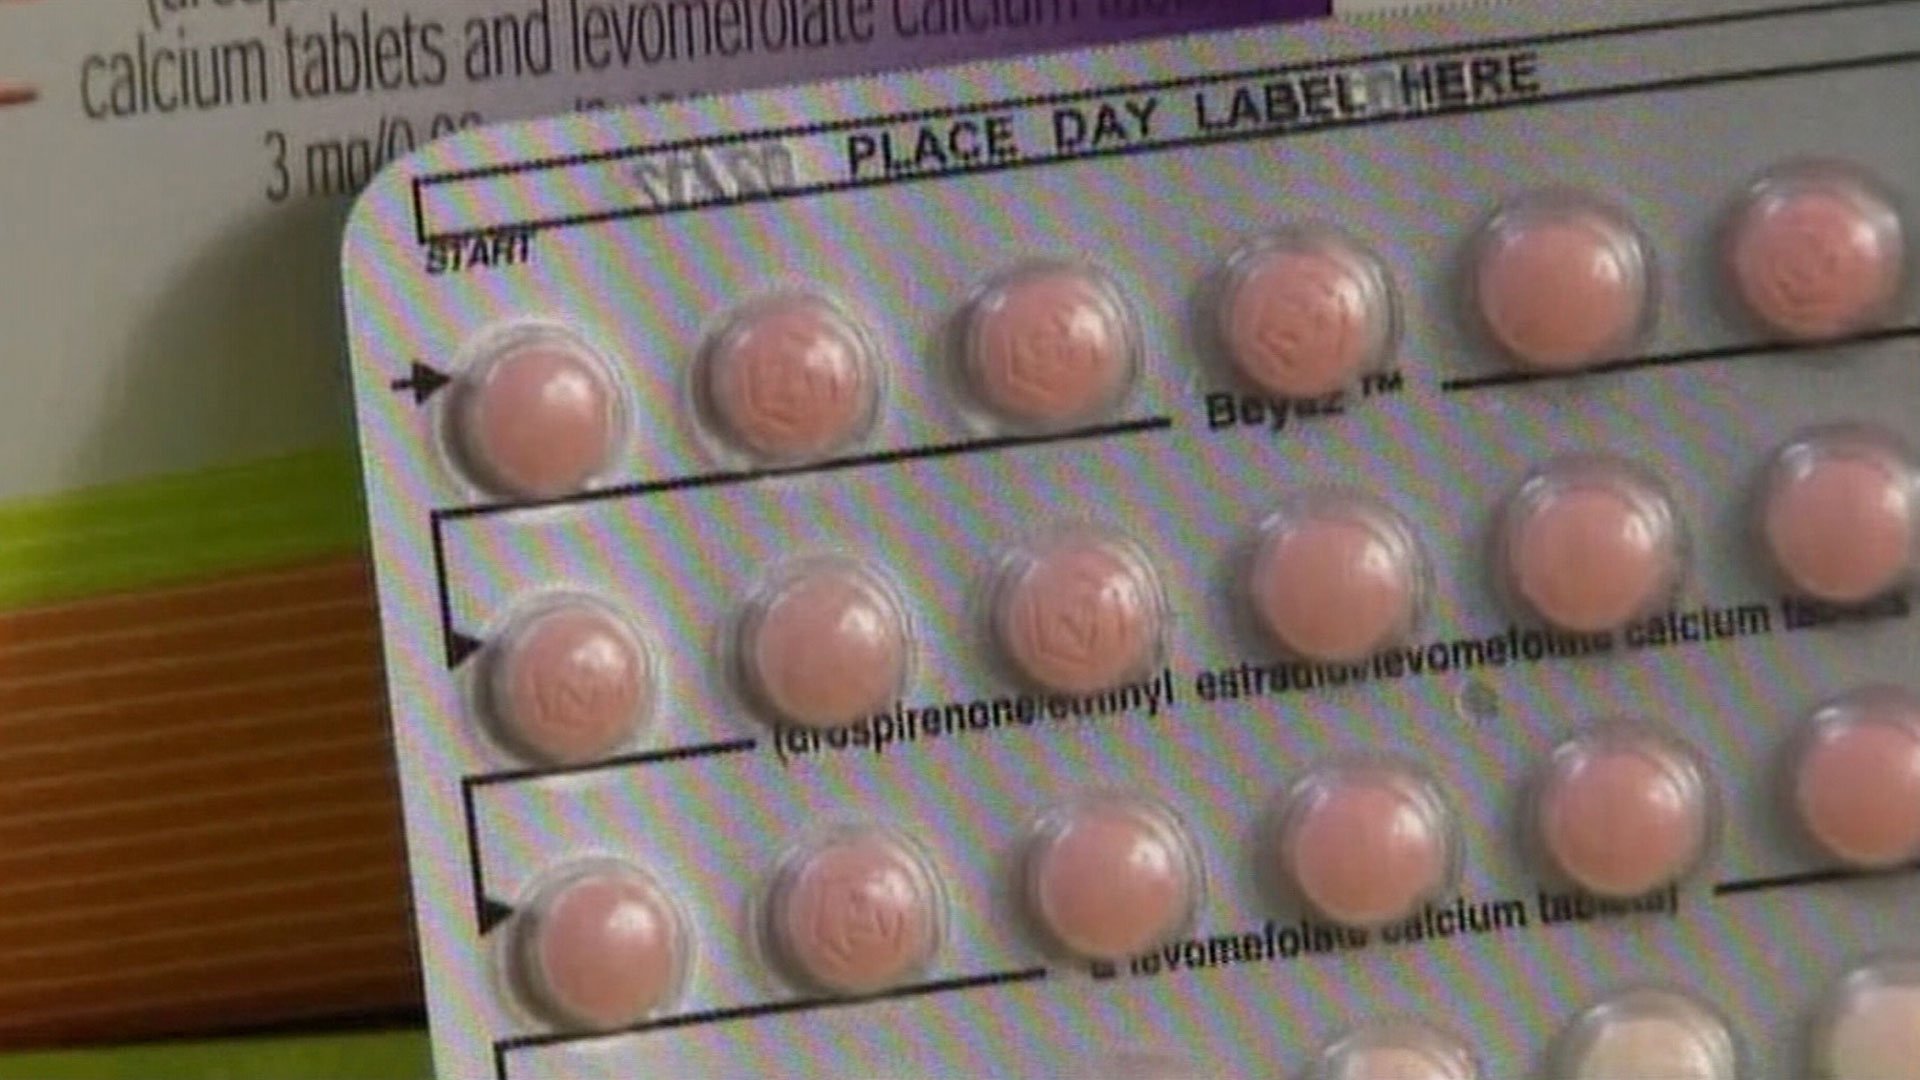 New research: Some birth control pills more likely to ...